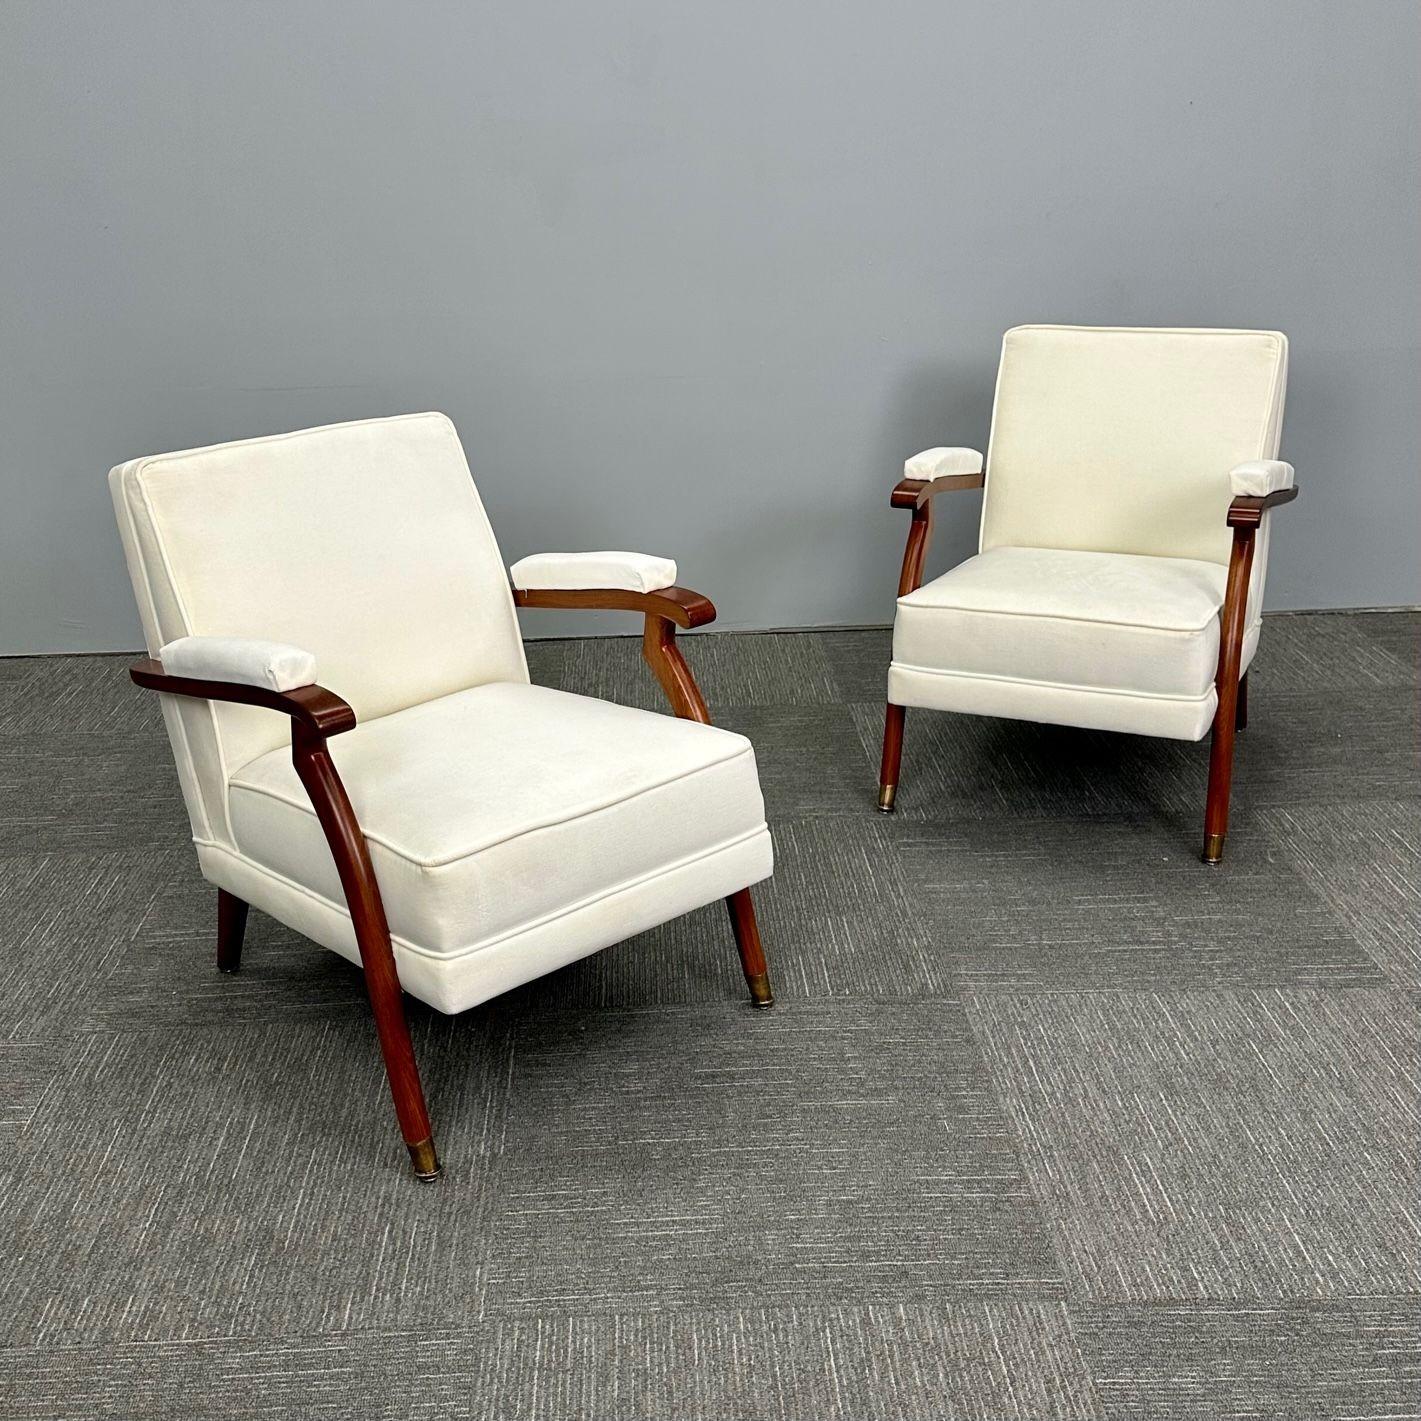 Pair of French Mid-Century Modern Maison Leleu Style Lounge / Arm Chairs, Mohair
 
Pair of French Art Deco / Mid-Century Modern lounge or arm chairs inspired by Maison Leleu. These chairs having stained and polished birch frames, newly padded arm